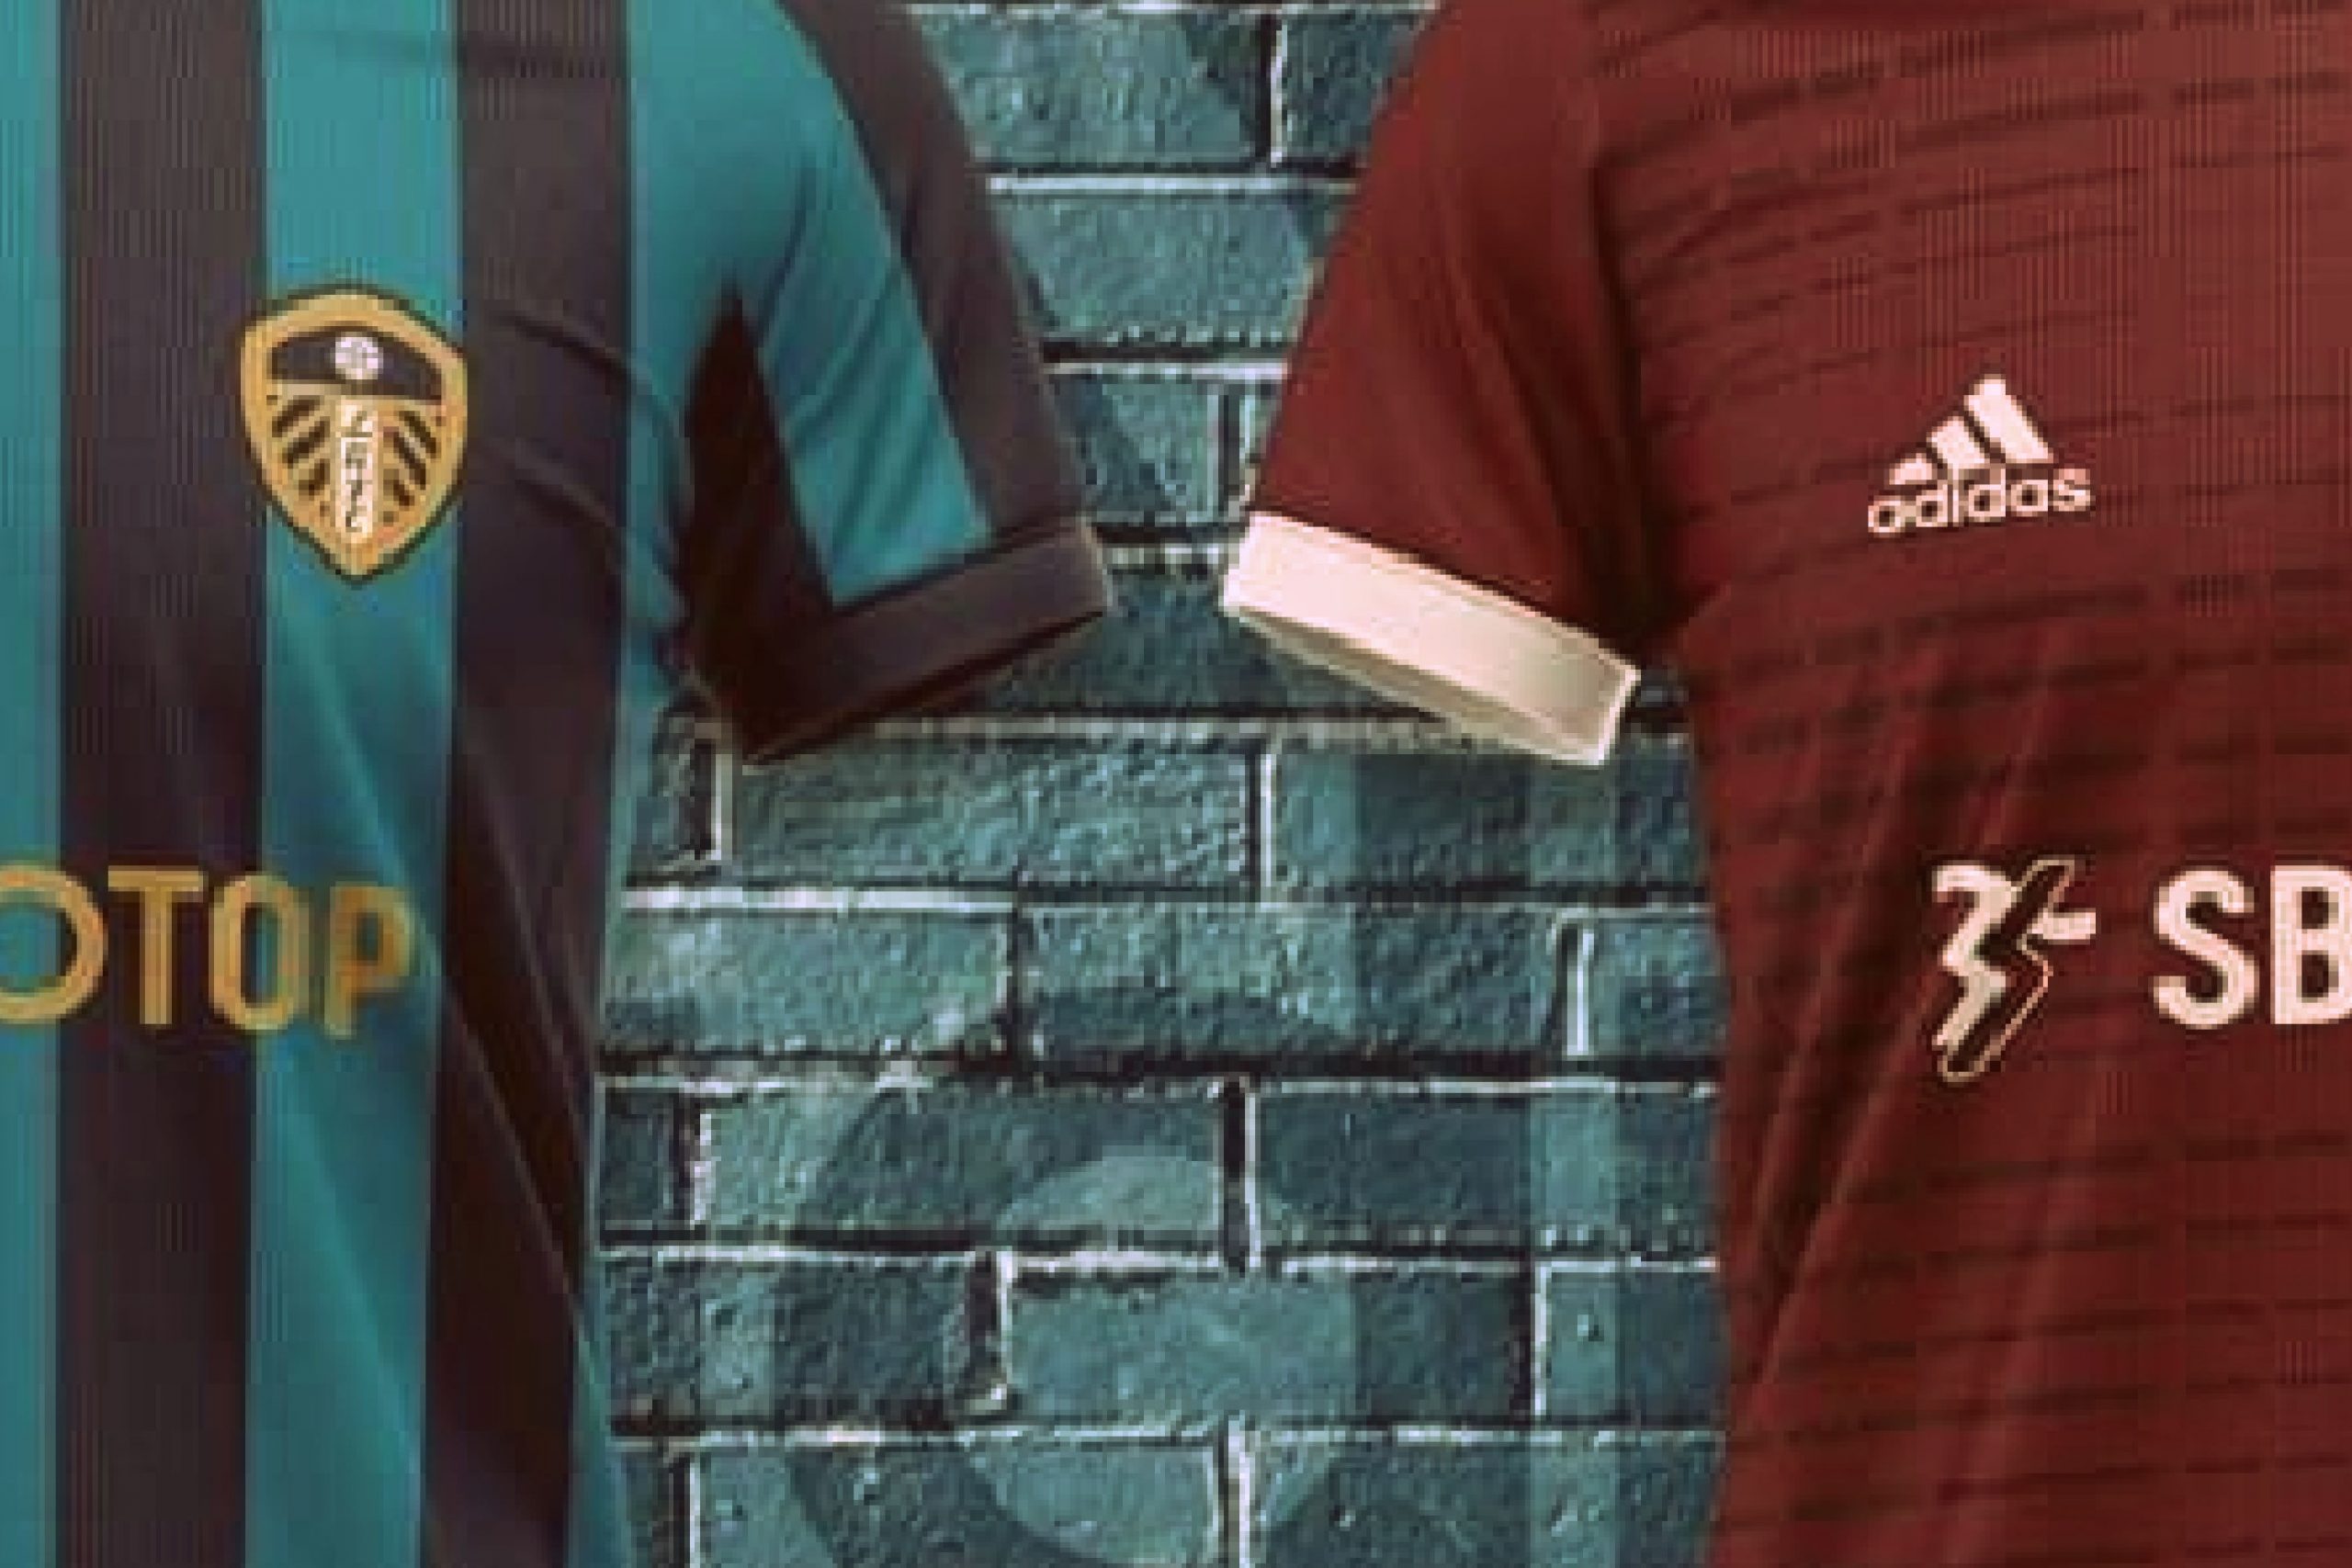 New leaks of Leeds United’s away and possible third kit for 20/21